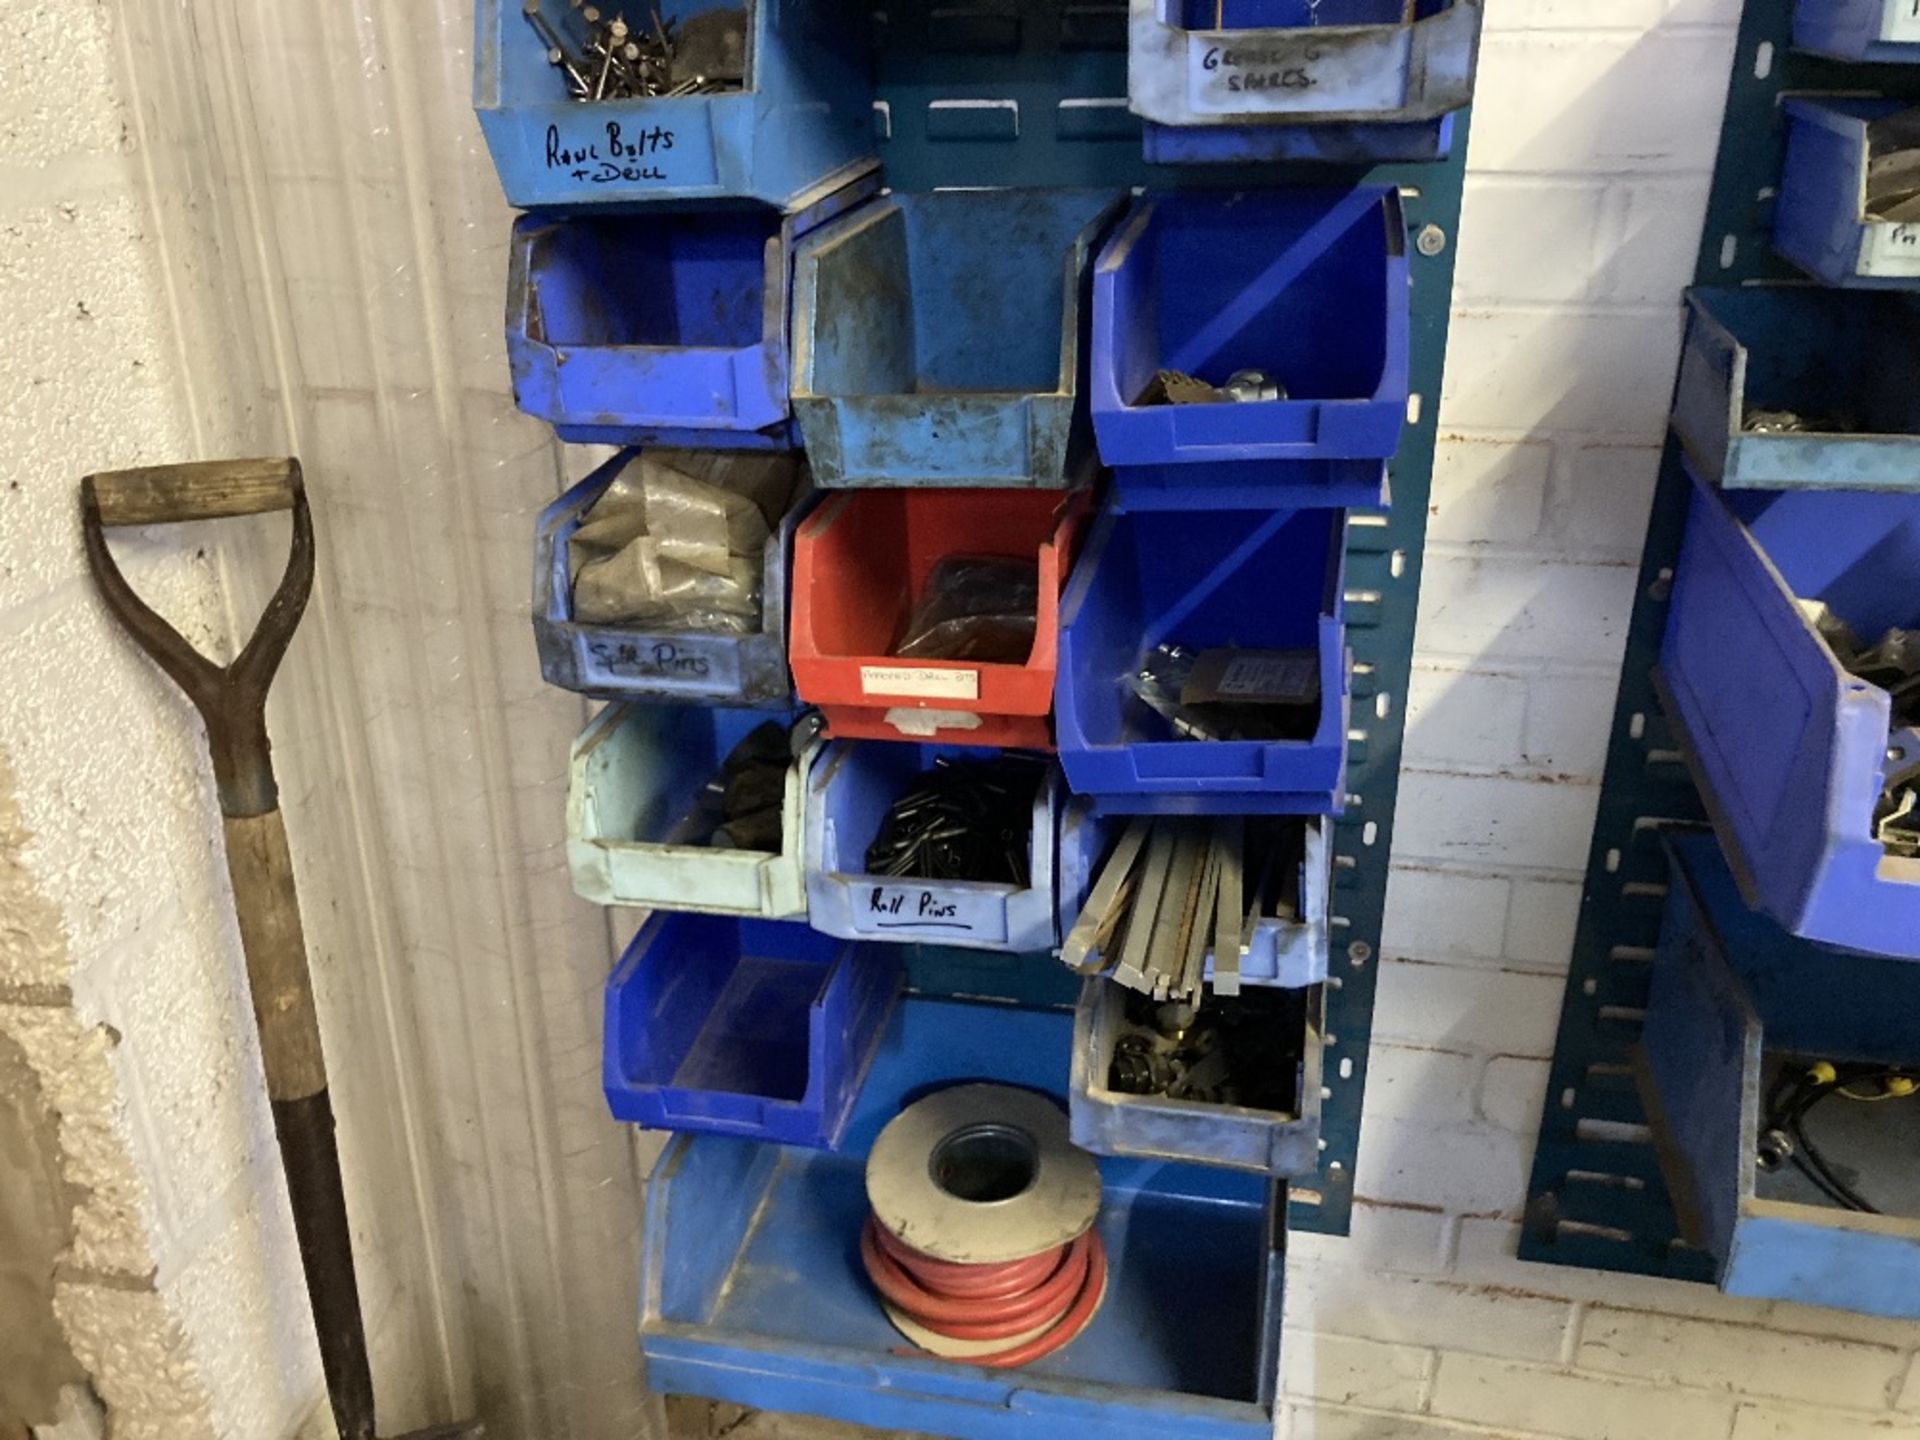 Content of Parts Room Containing Large Quantity of Various Parts & Components - Image 82 of 150